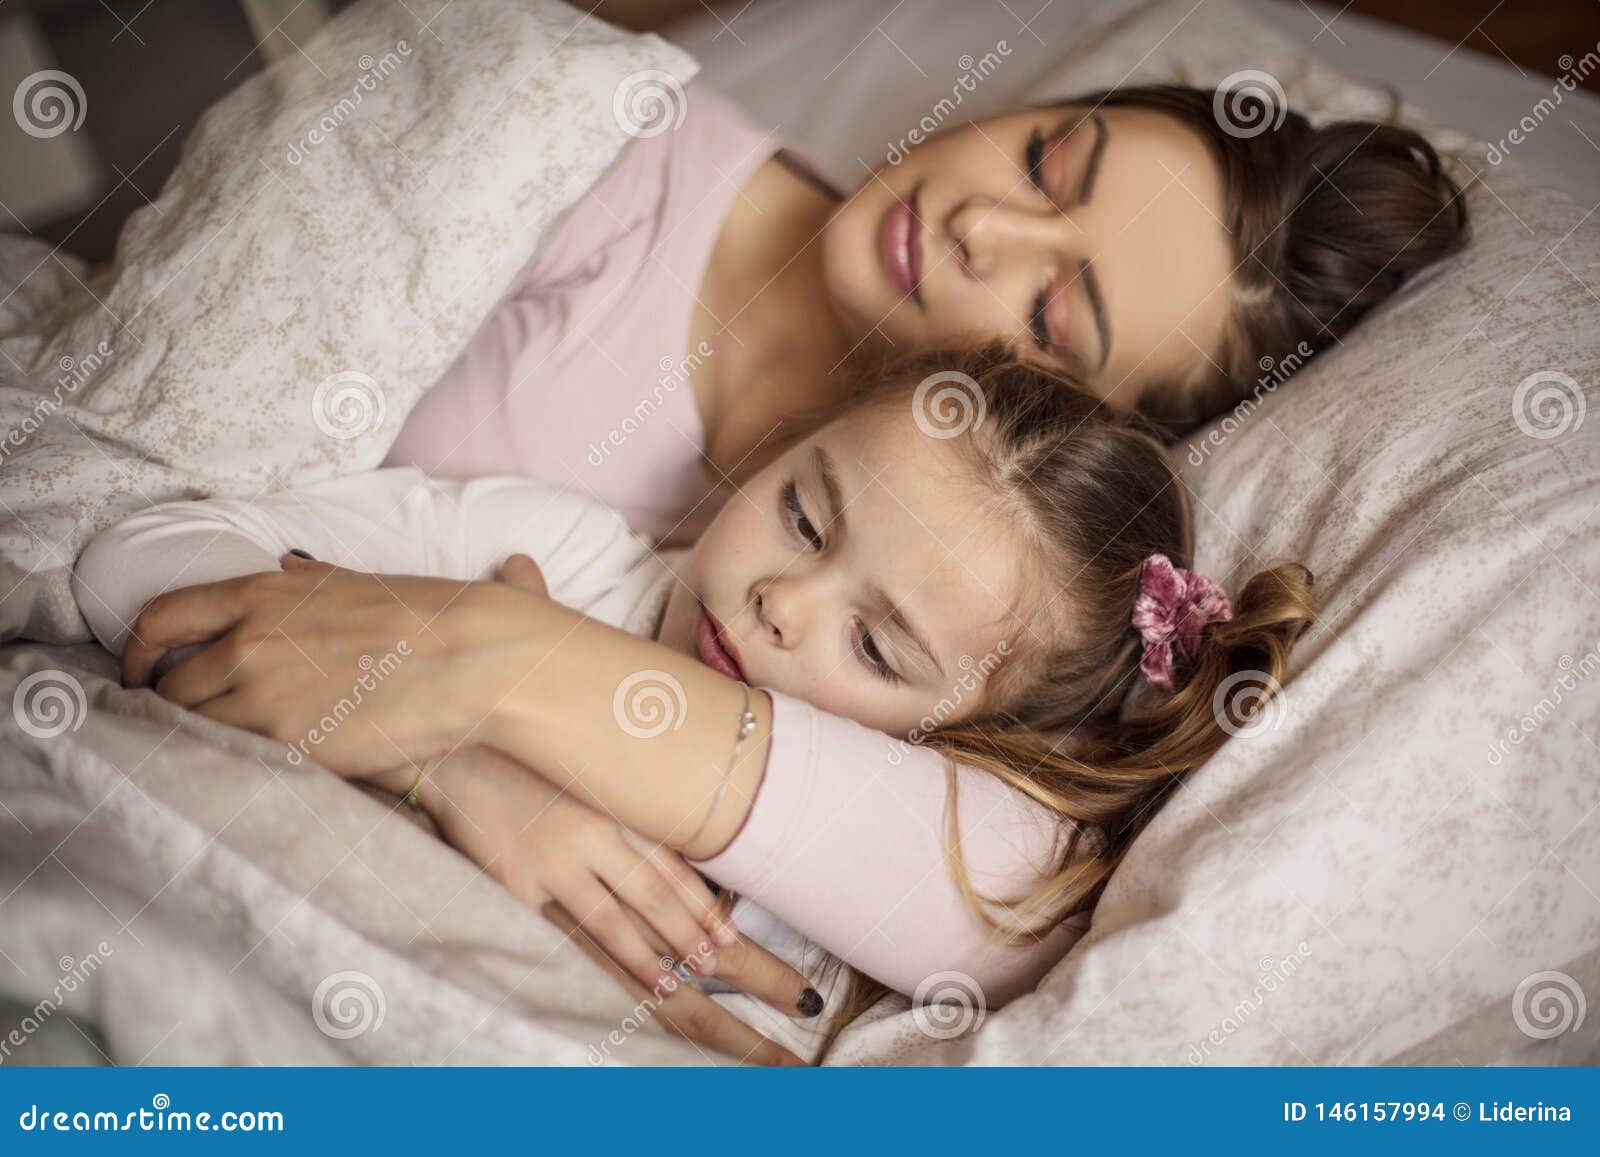 In bed next to mom